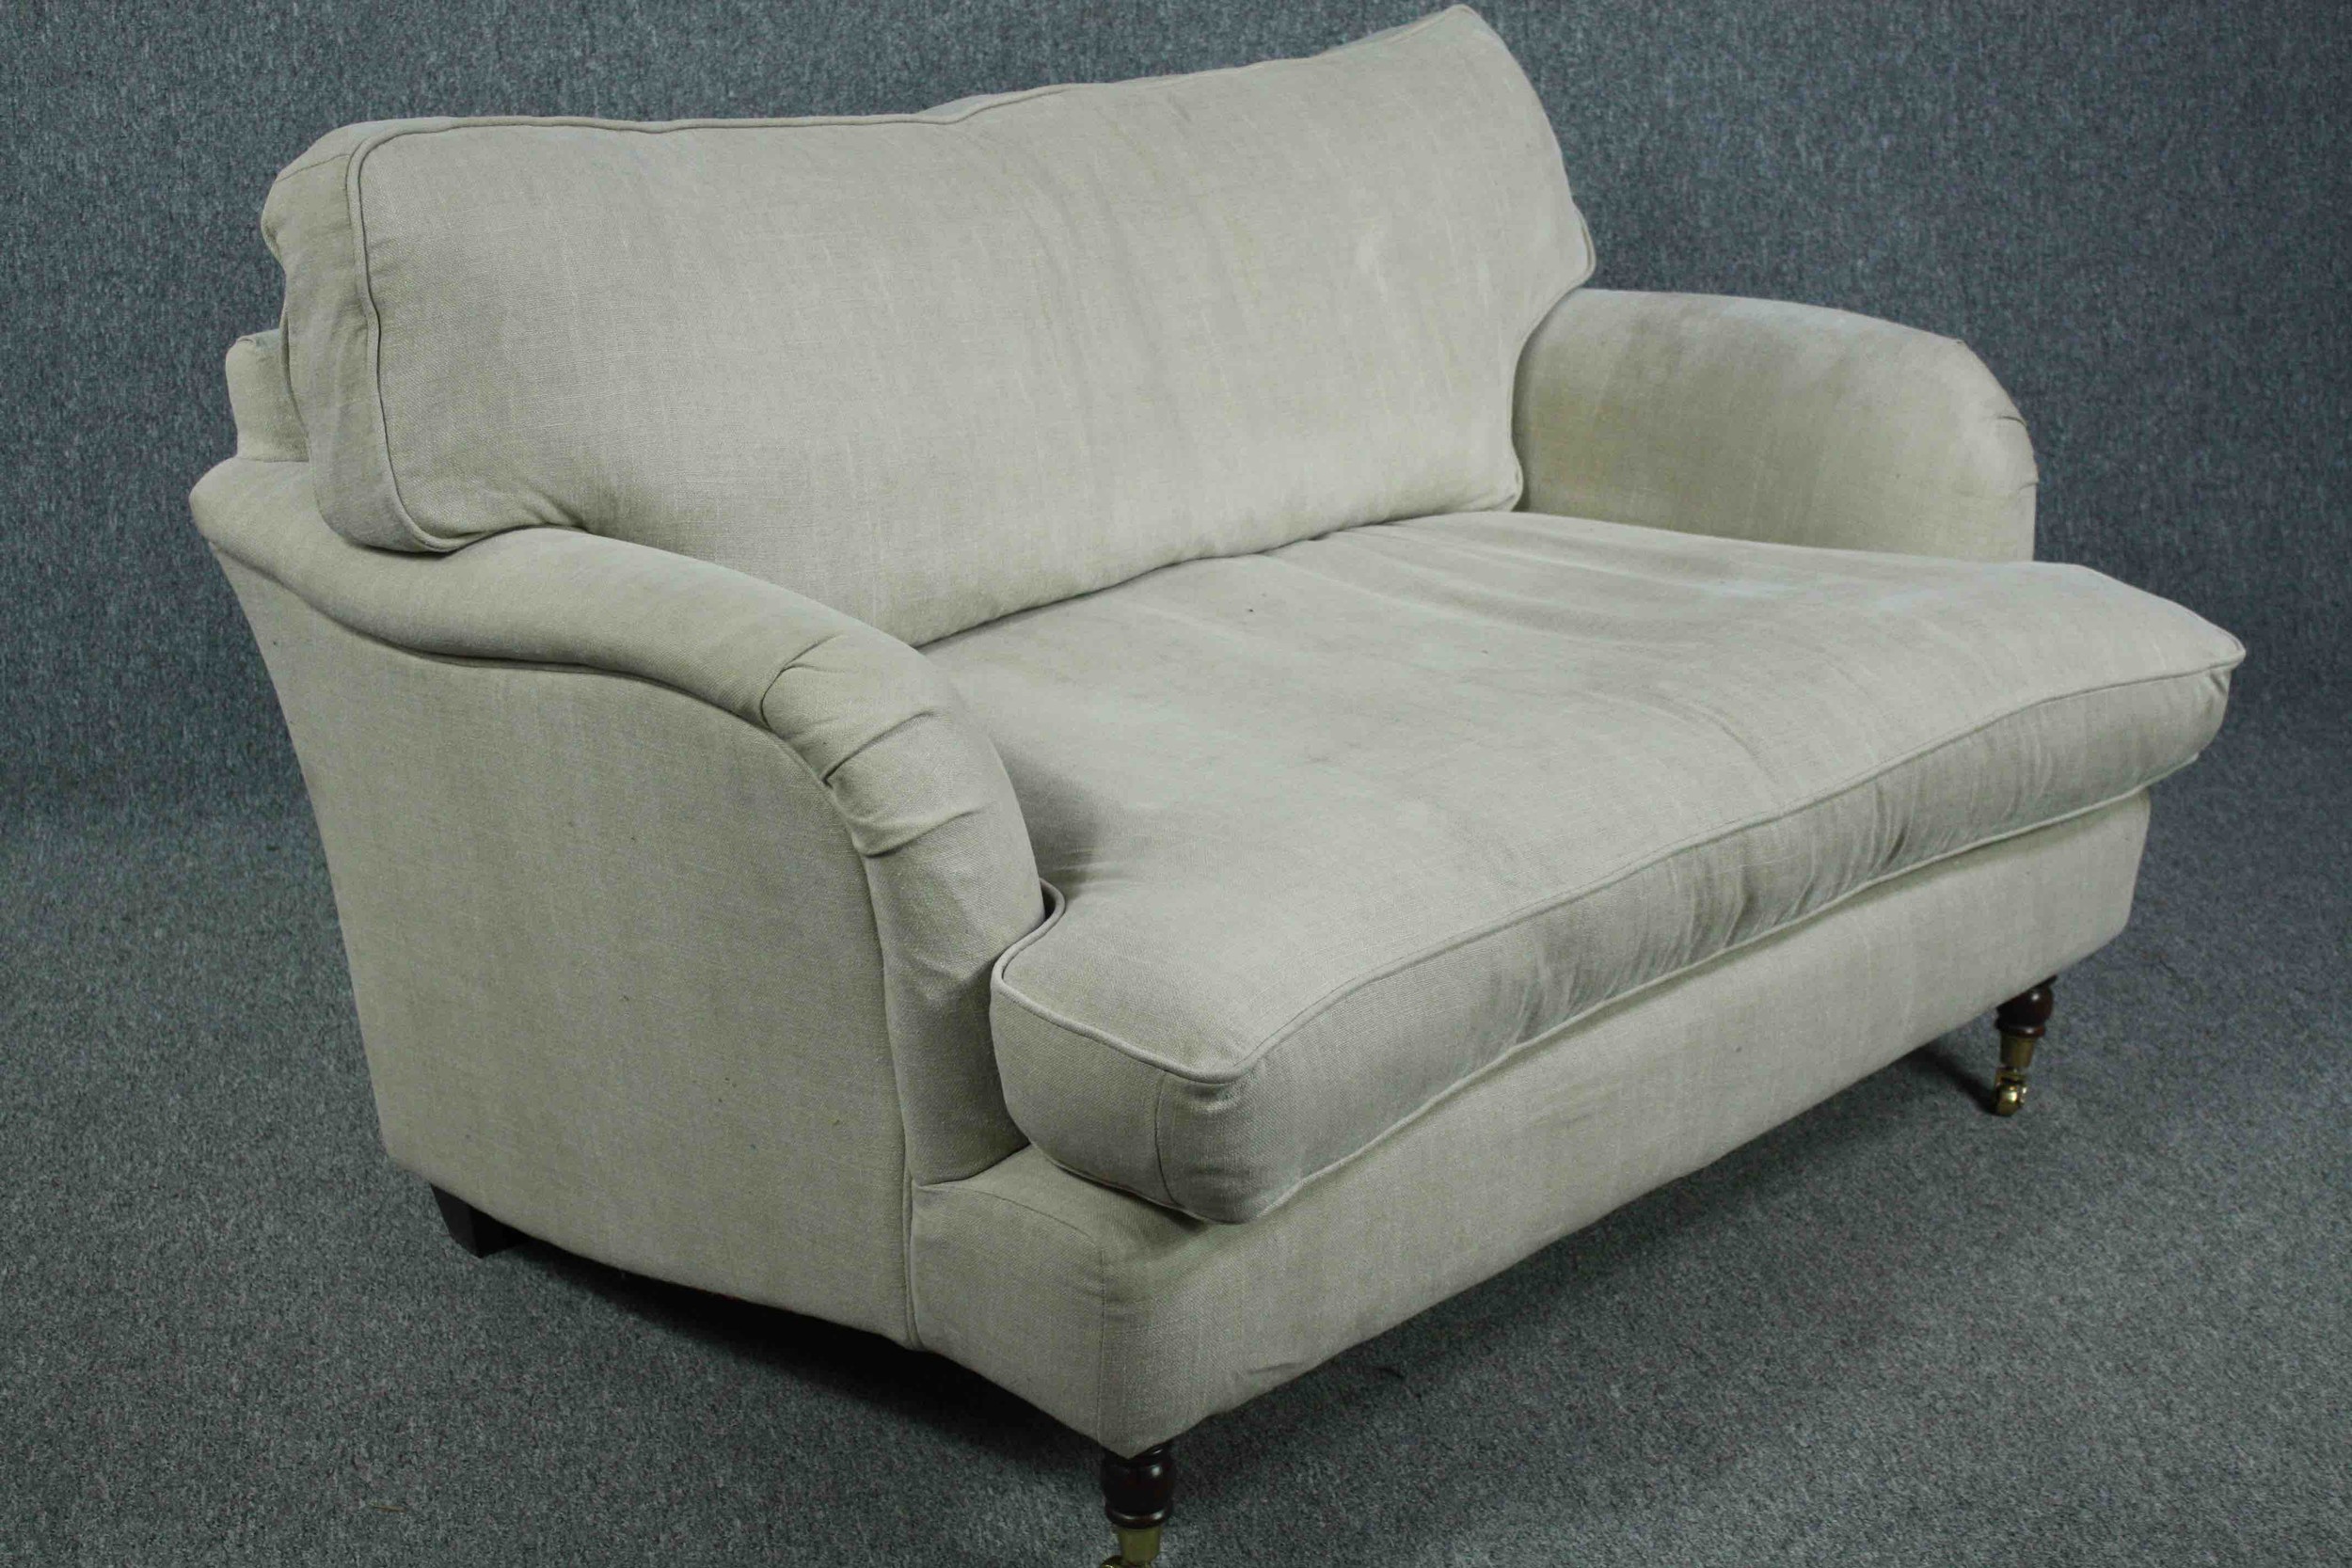 Sofa, contemporary in the Howard style on turned supports with brass cup casters. H.82 W.128 D.90cm. - Image 2 of 5